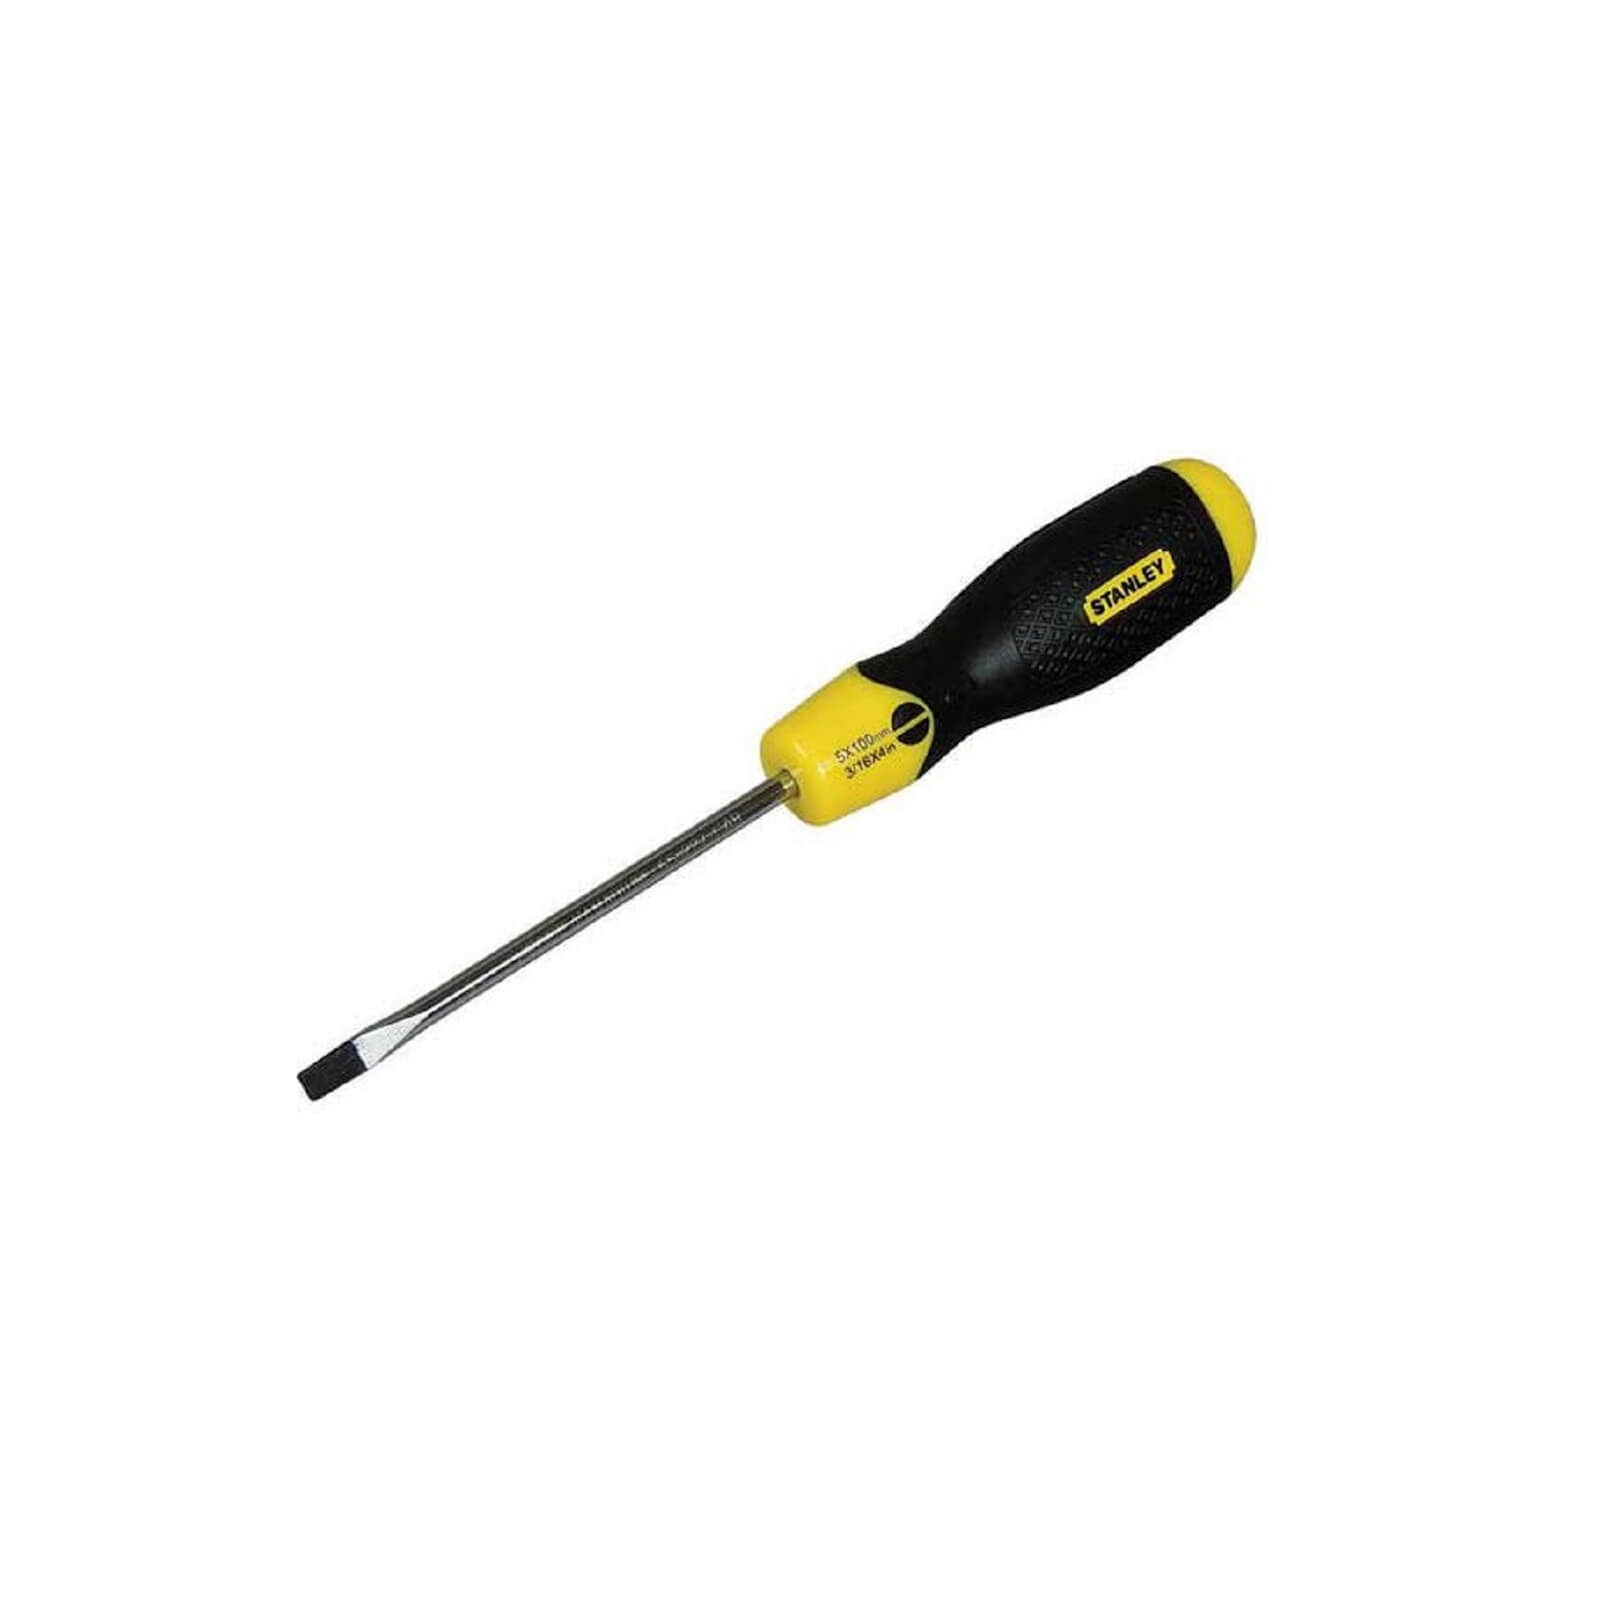 Photo of Stanley Cushion Grip Flared Screwdriver - 10x200mm